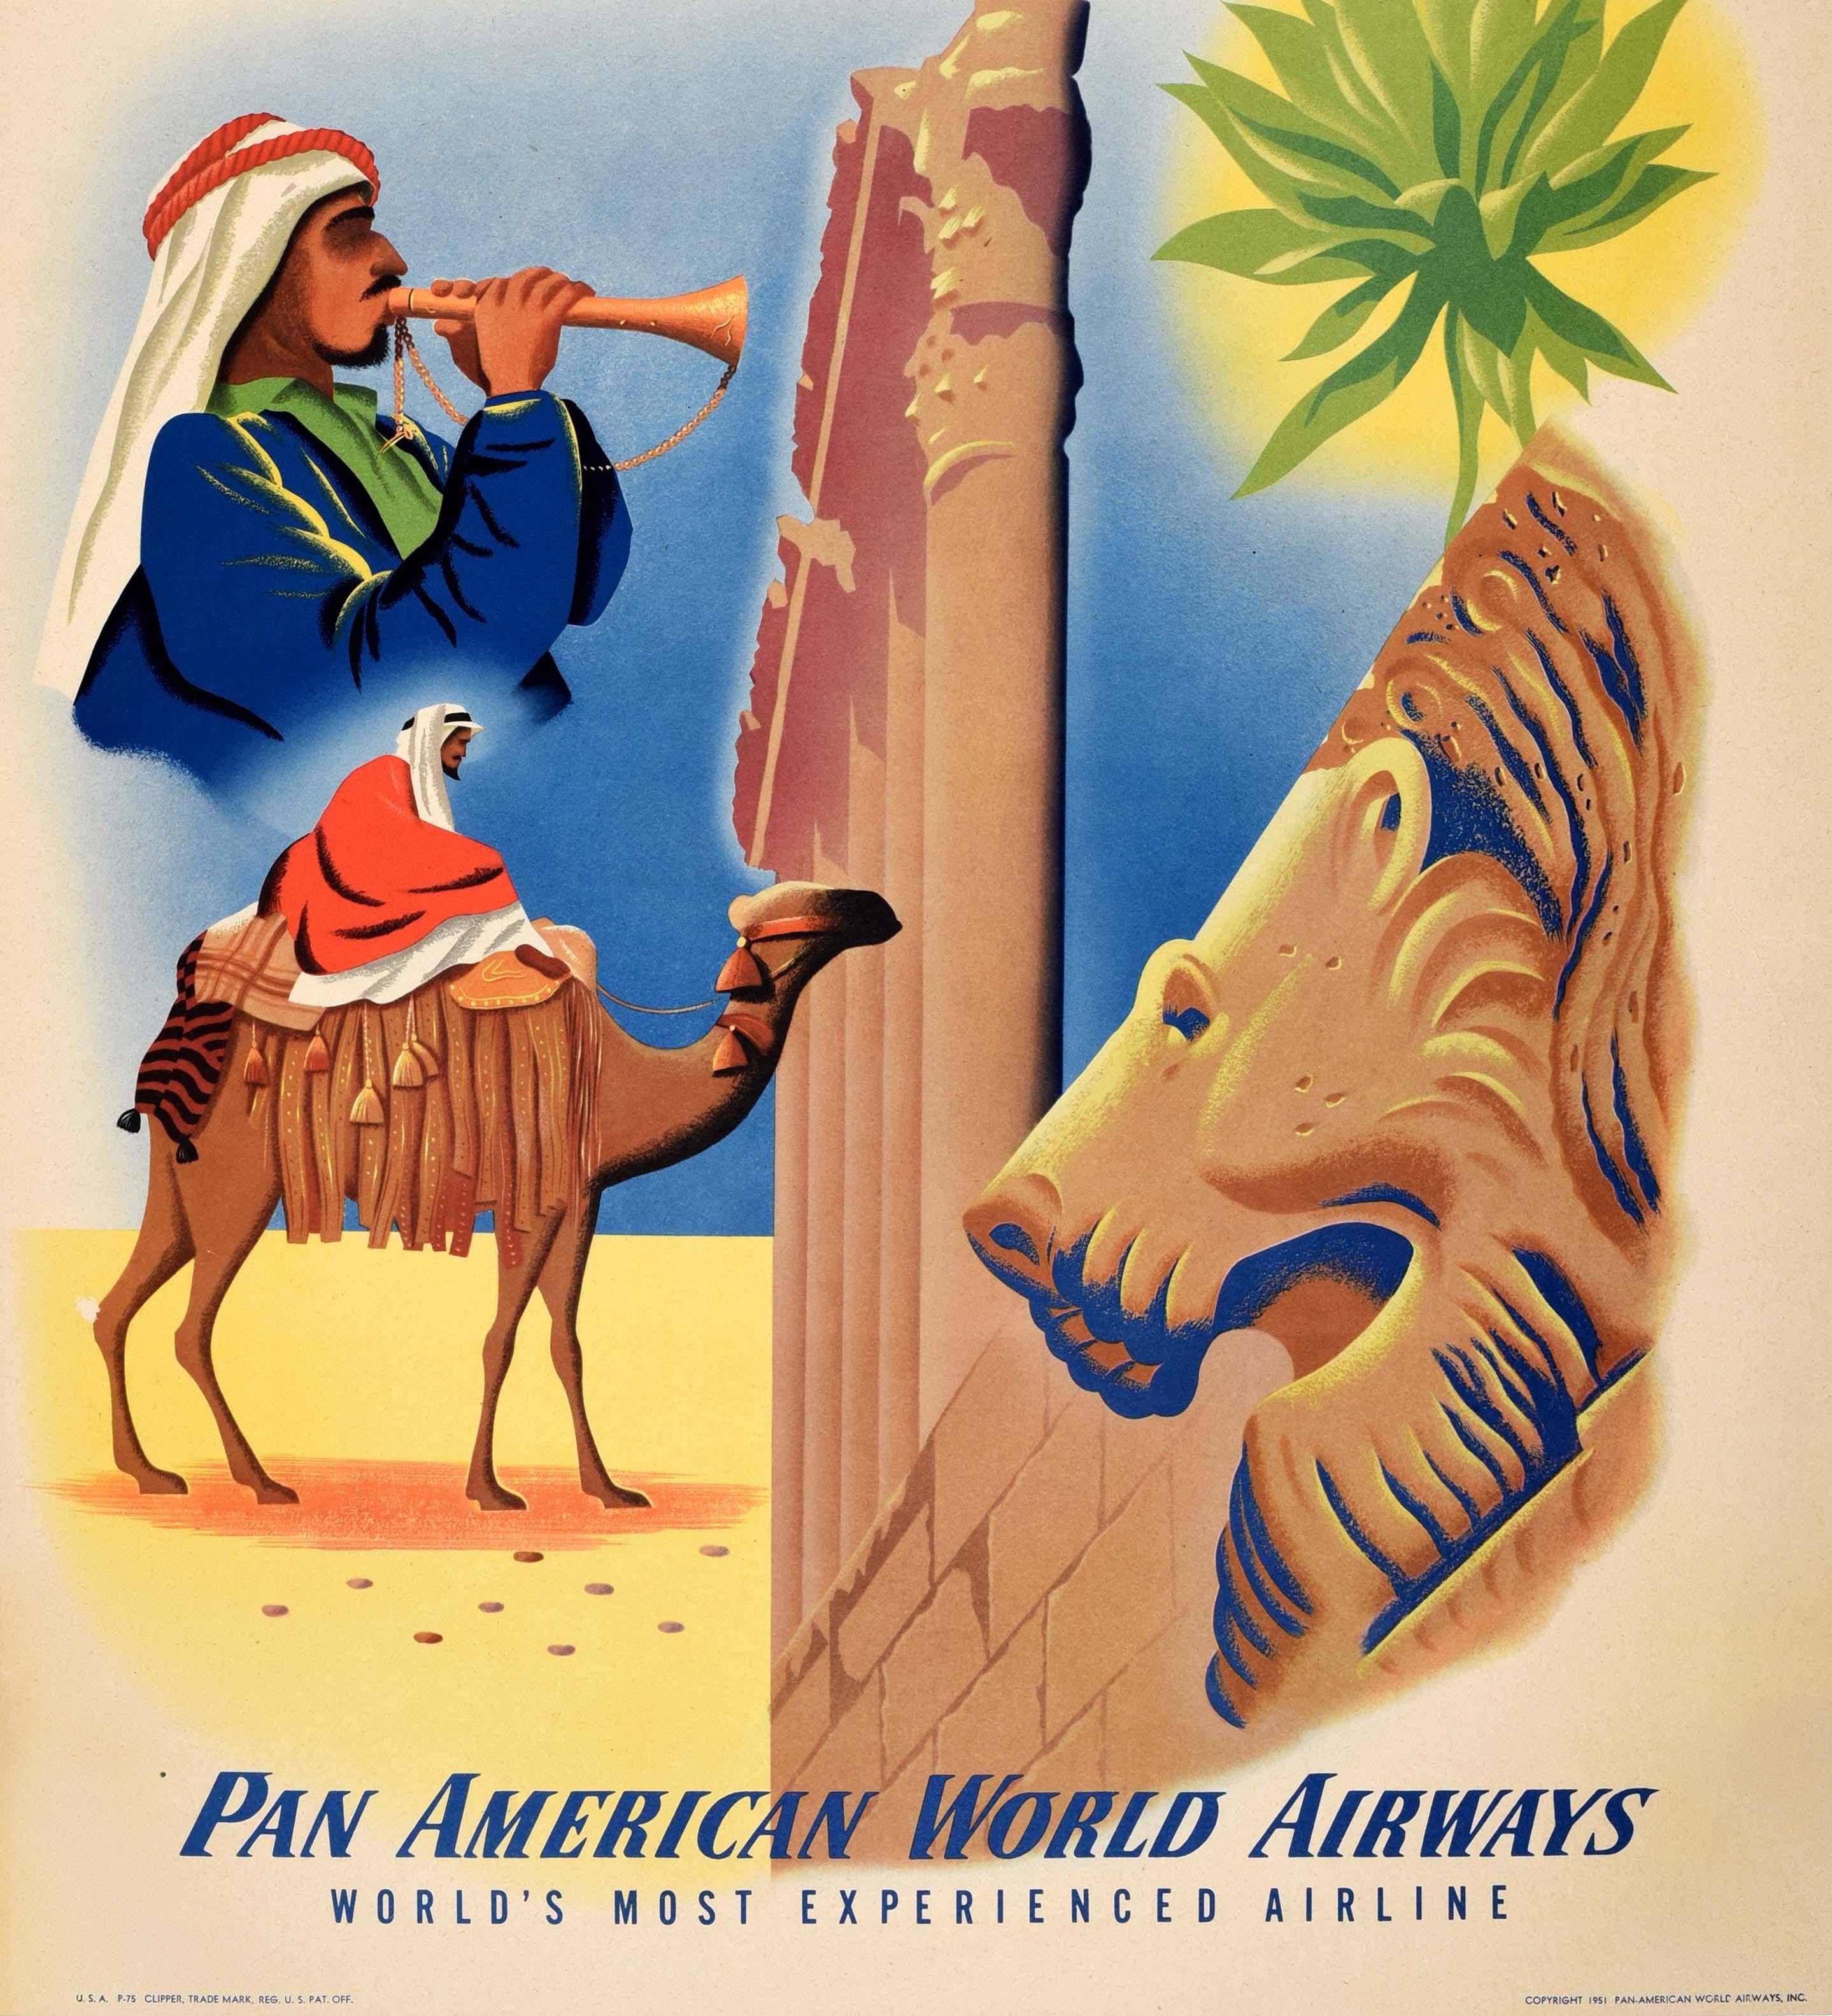 Original vintage travel poster - Gateway to the Middle East and the Holy Land Beirut Lebanon by Clipper Pan American World Airways World's Most Experienced Airline - featuring illustrations of ancient architecture pillars and wall, a stone head of a